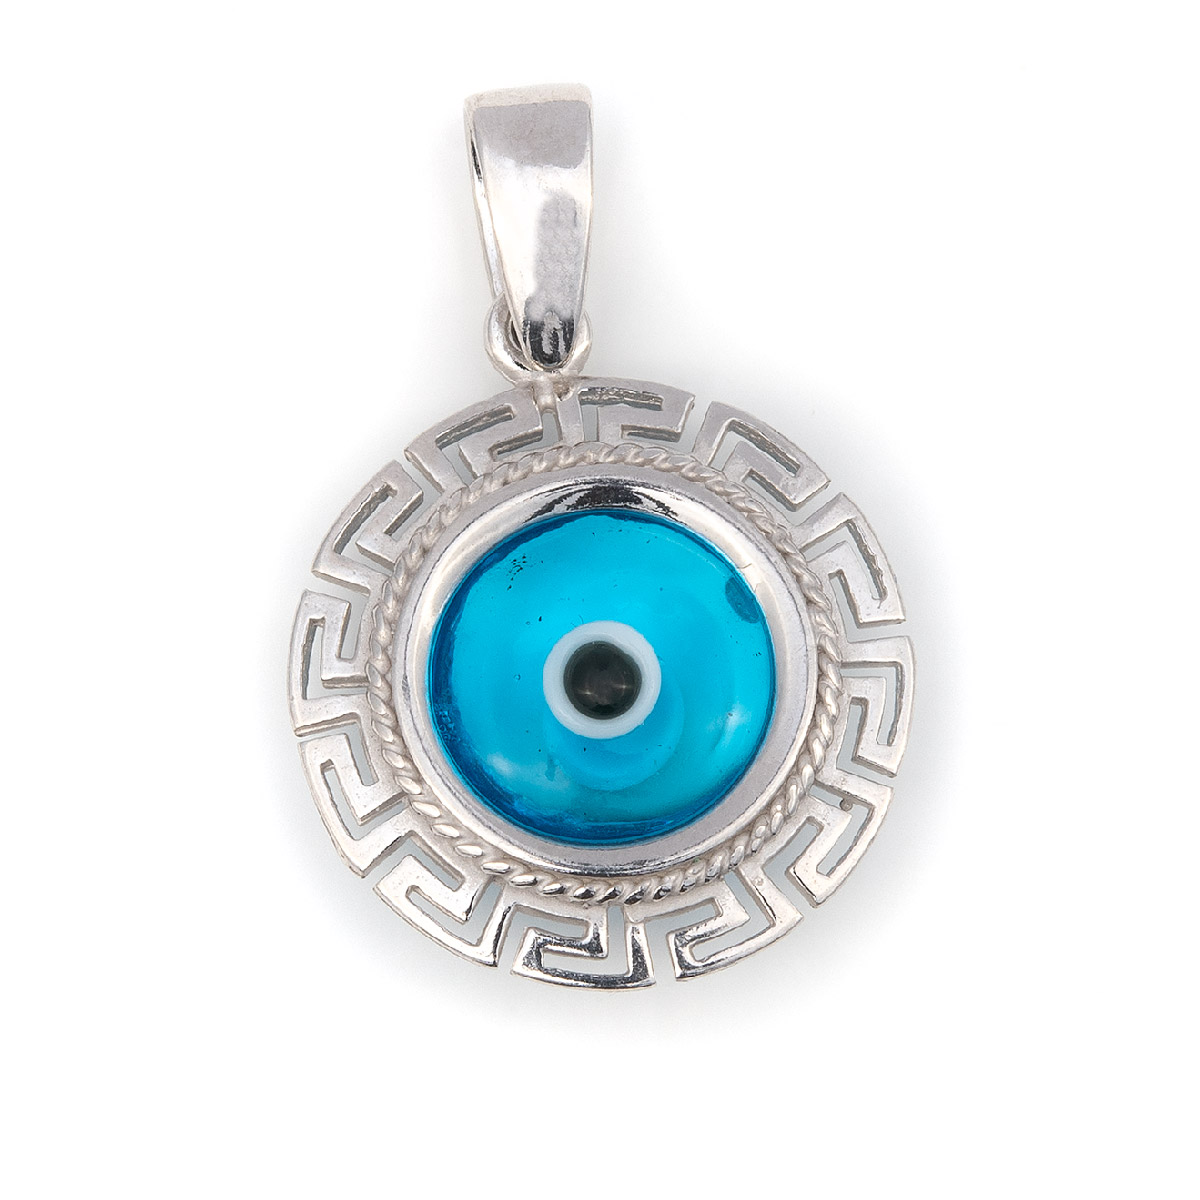 Evil Eye Pendant with Greek Key design and Meandros - GREEK ROOTS